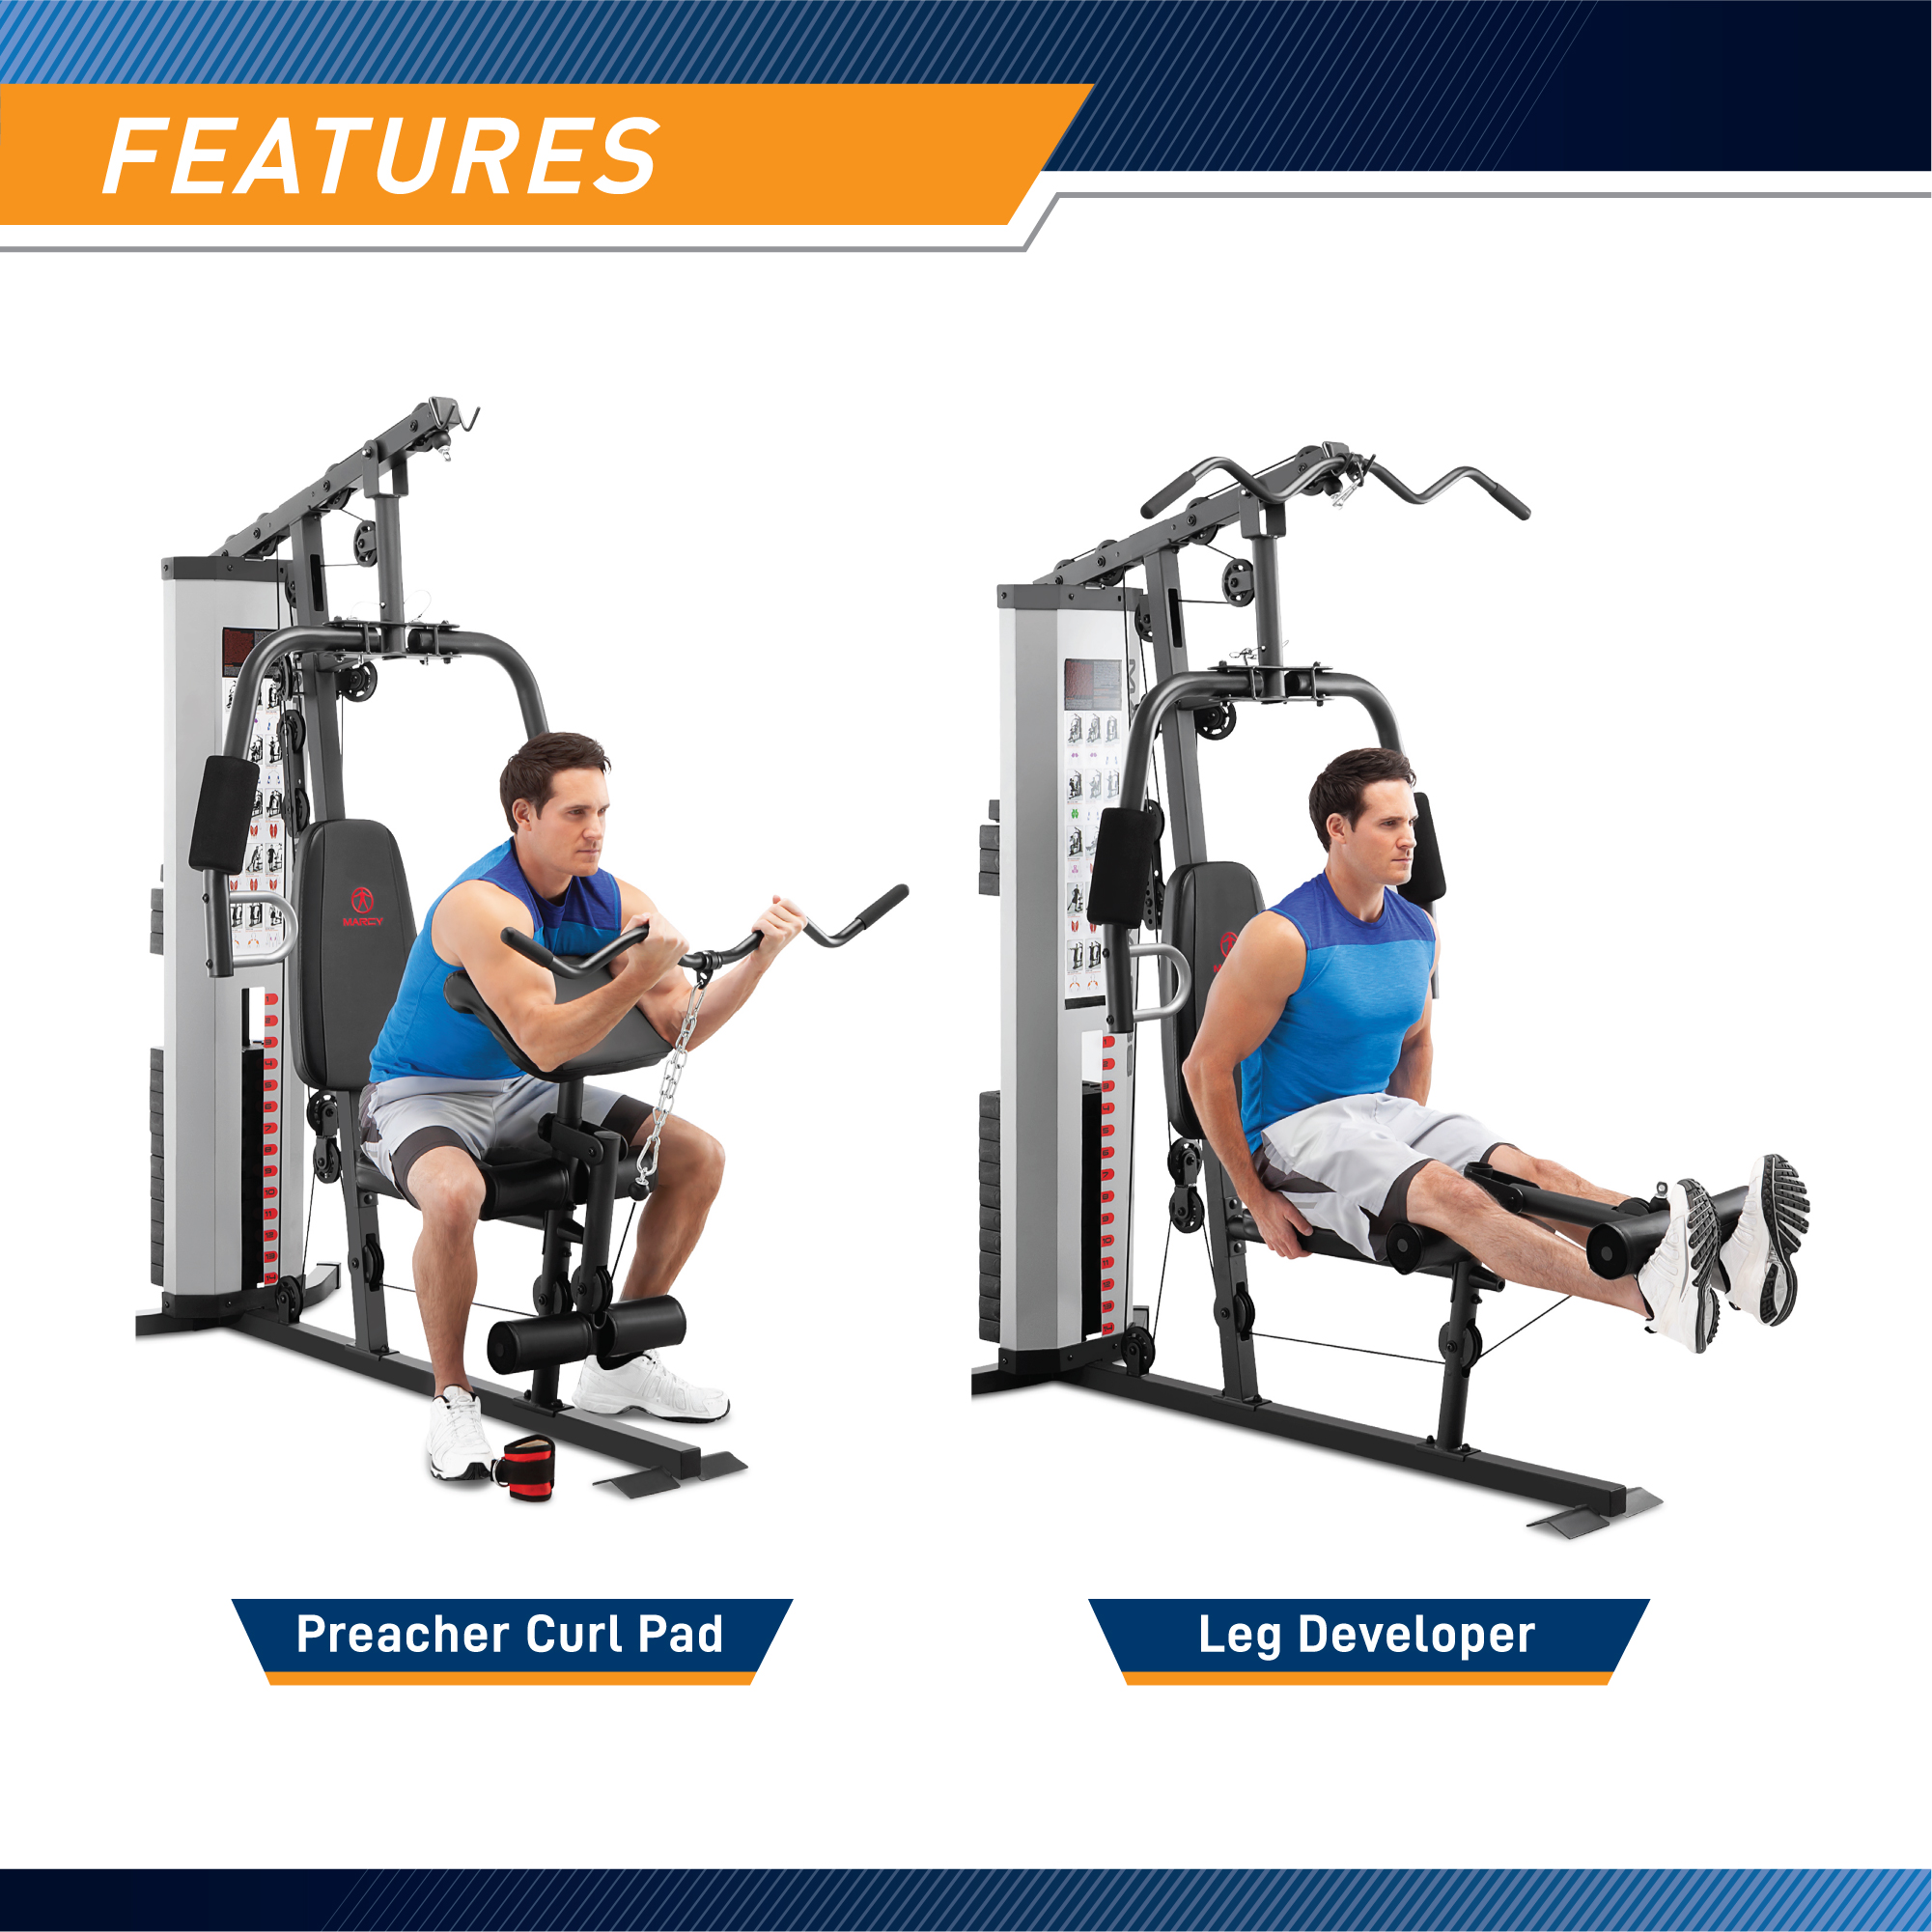 https://cdn11.bigcommerce.com/s-r2fl439k1s/images/stencil/original/products/138/2153/Marcy_Home_Gym_System_150lb_Weight_Stack_Machine_MWM-988_-_Infographic_-_Leg_Developer_and_Preacher_Curl_Pad__50427.1677714781.jpg